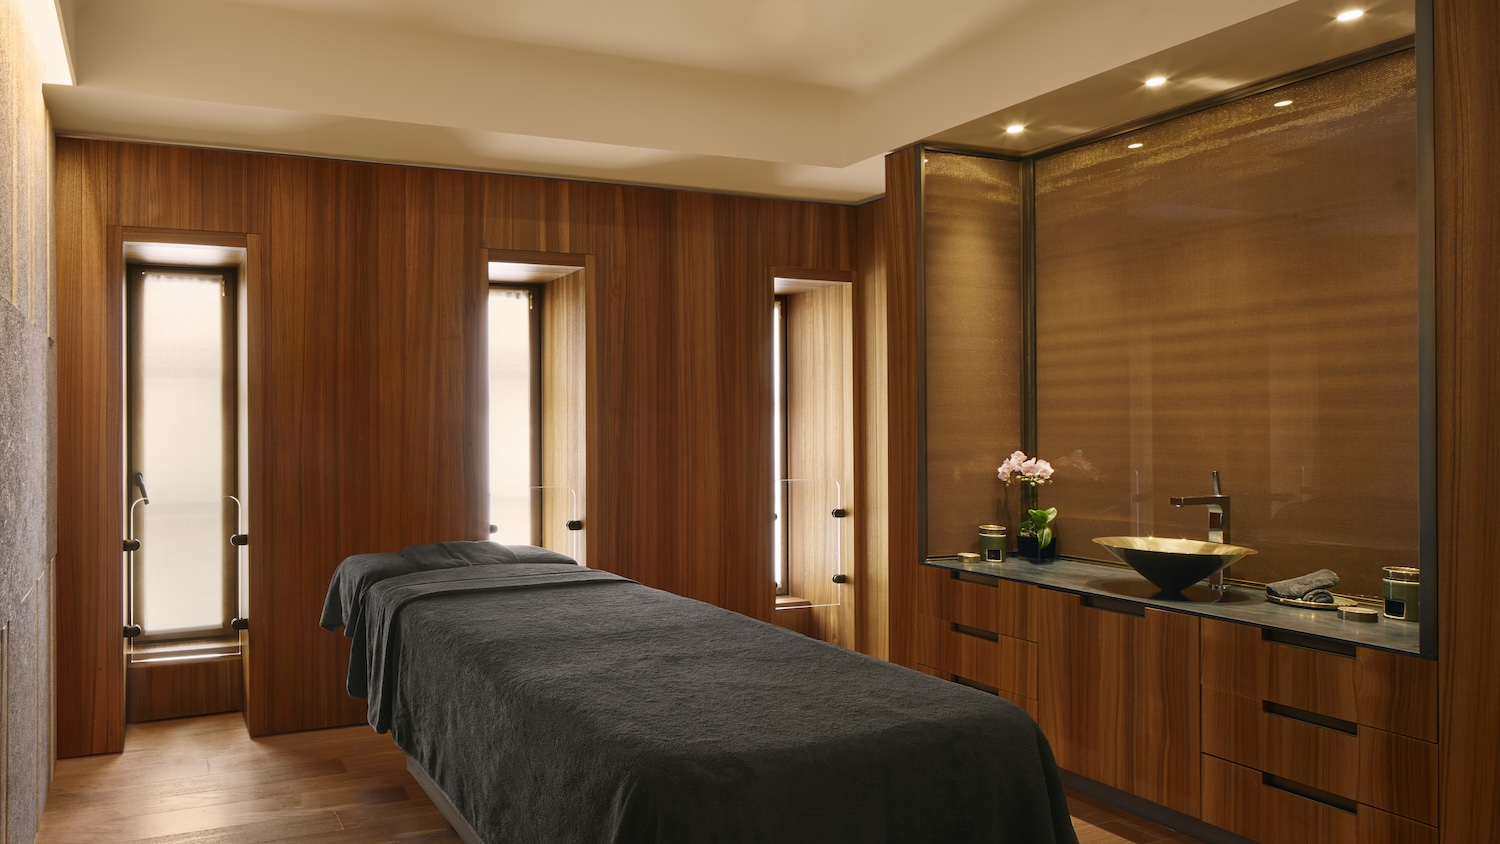 A wood panelled spa treatment room